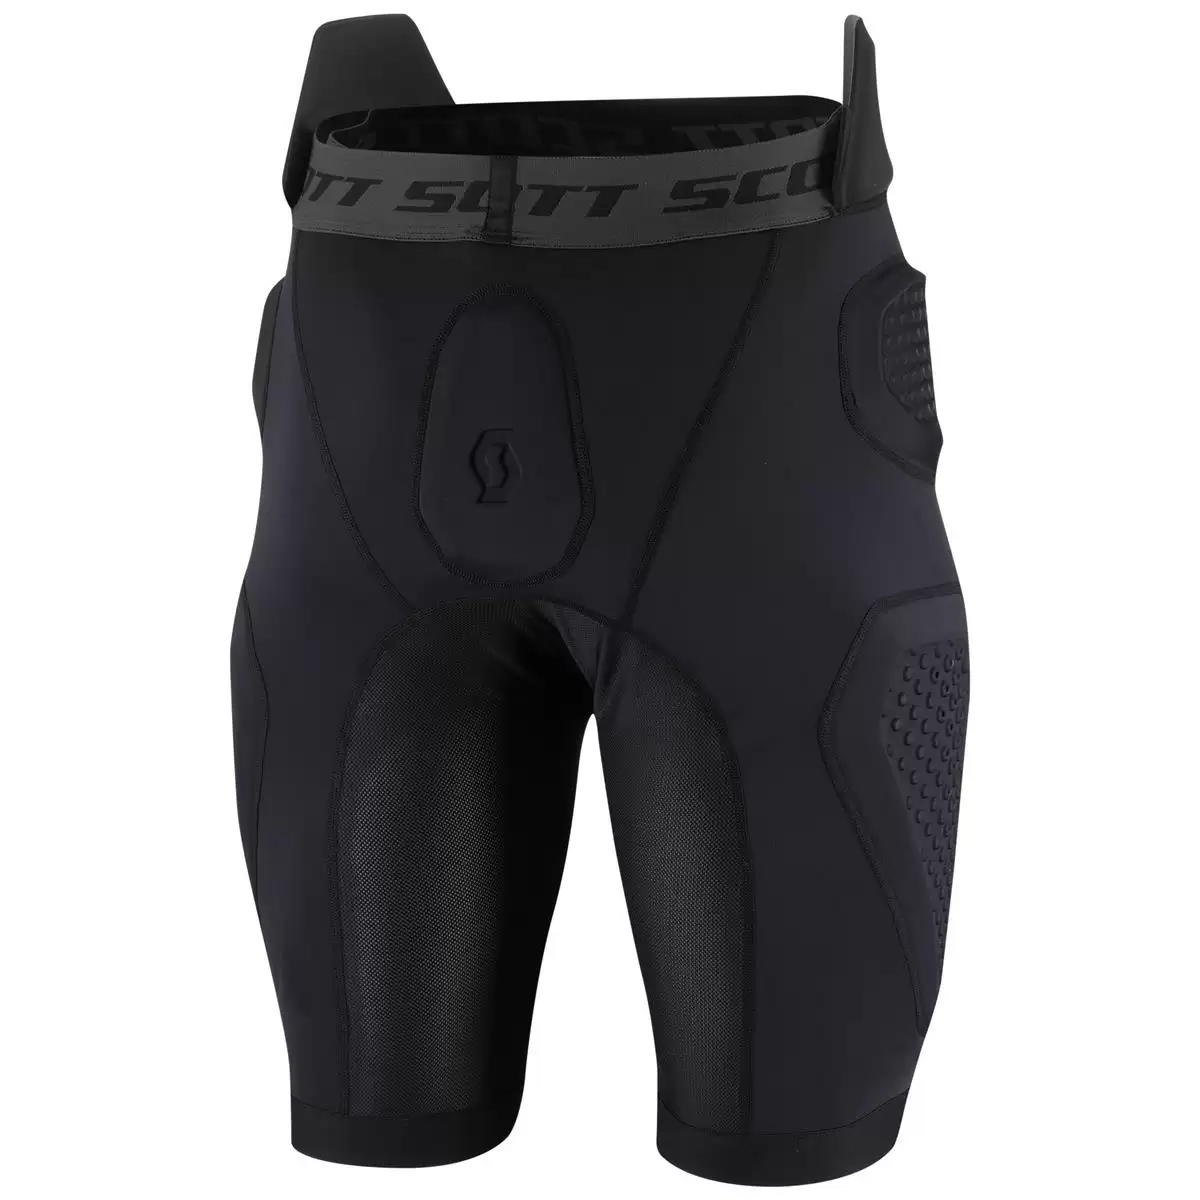 Short protector Softcon air black - Size S #1